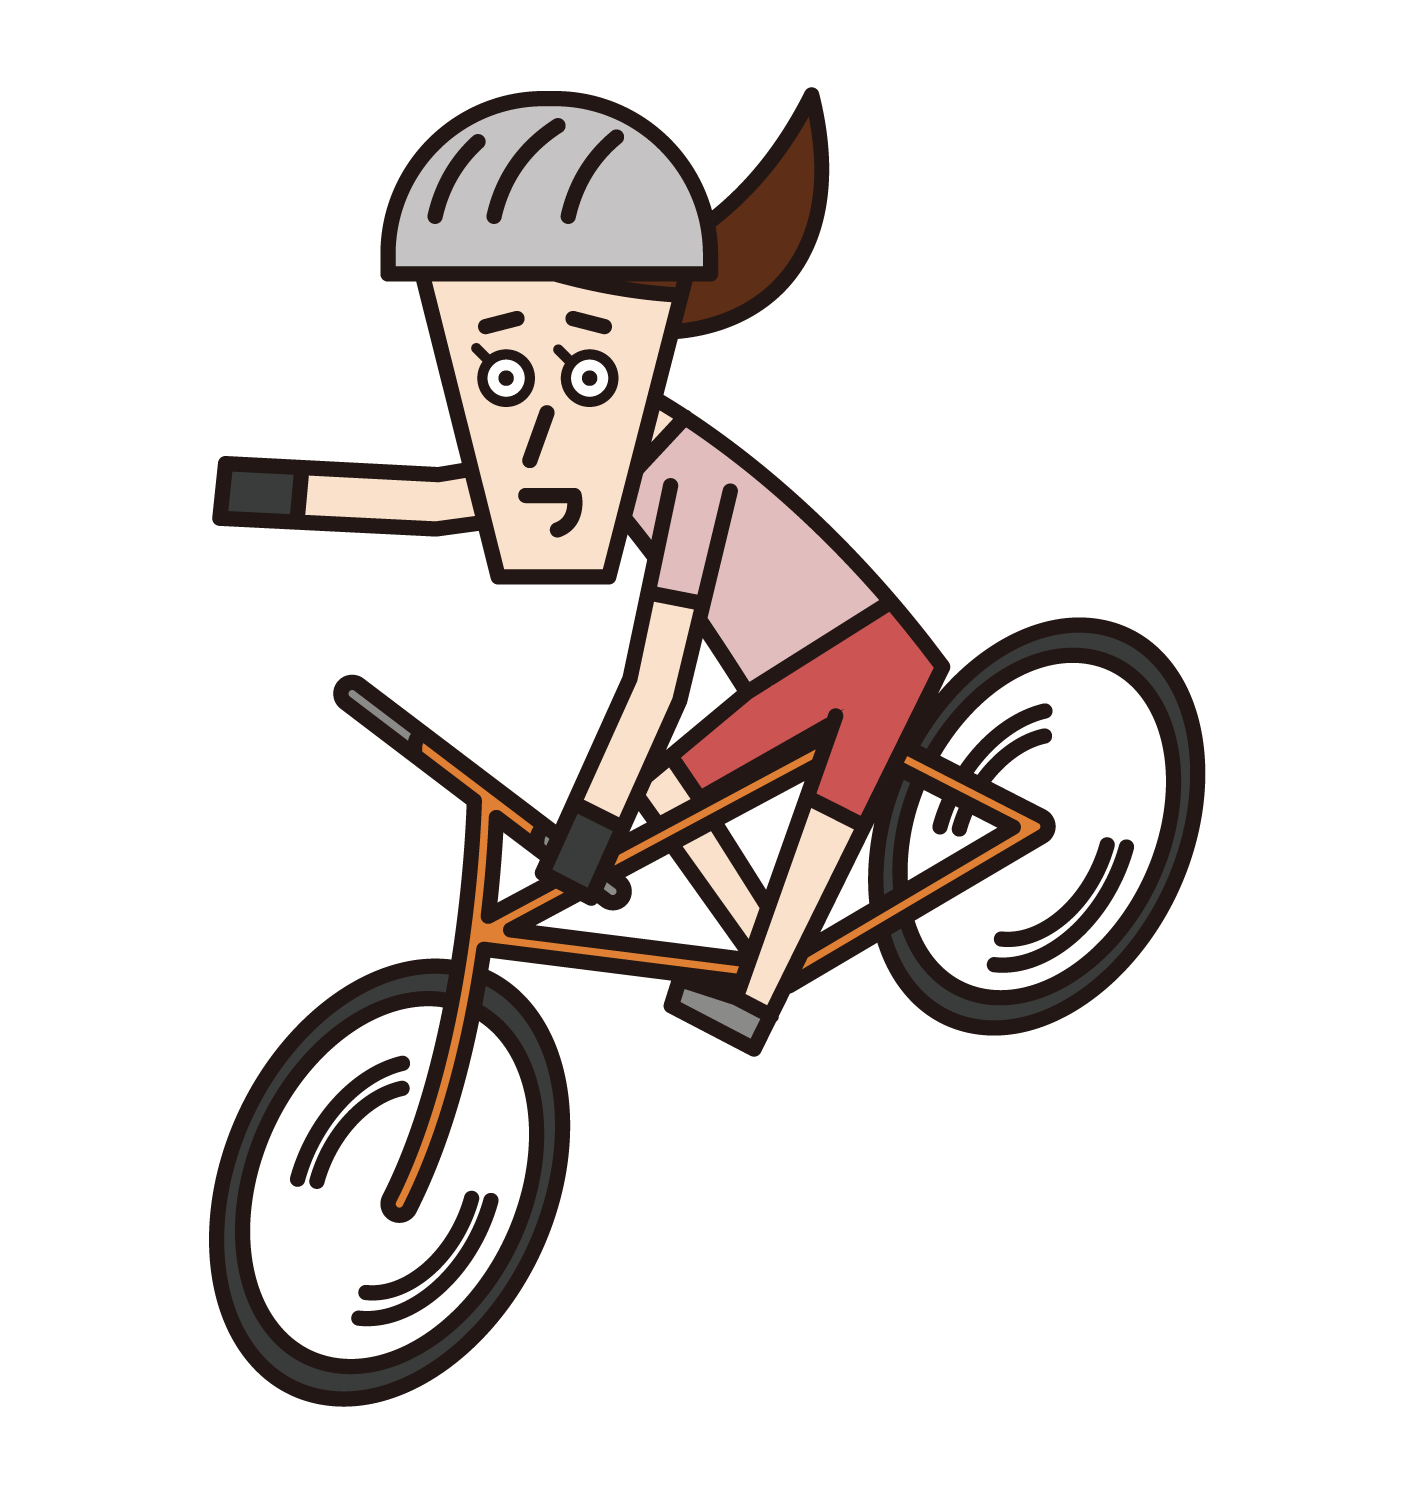 Illustration of a person (woman) driving a bicycle while operating a smartphone